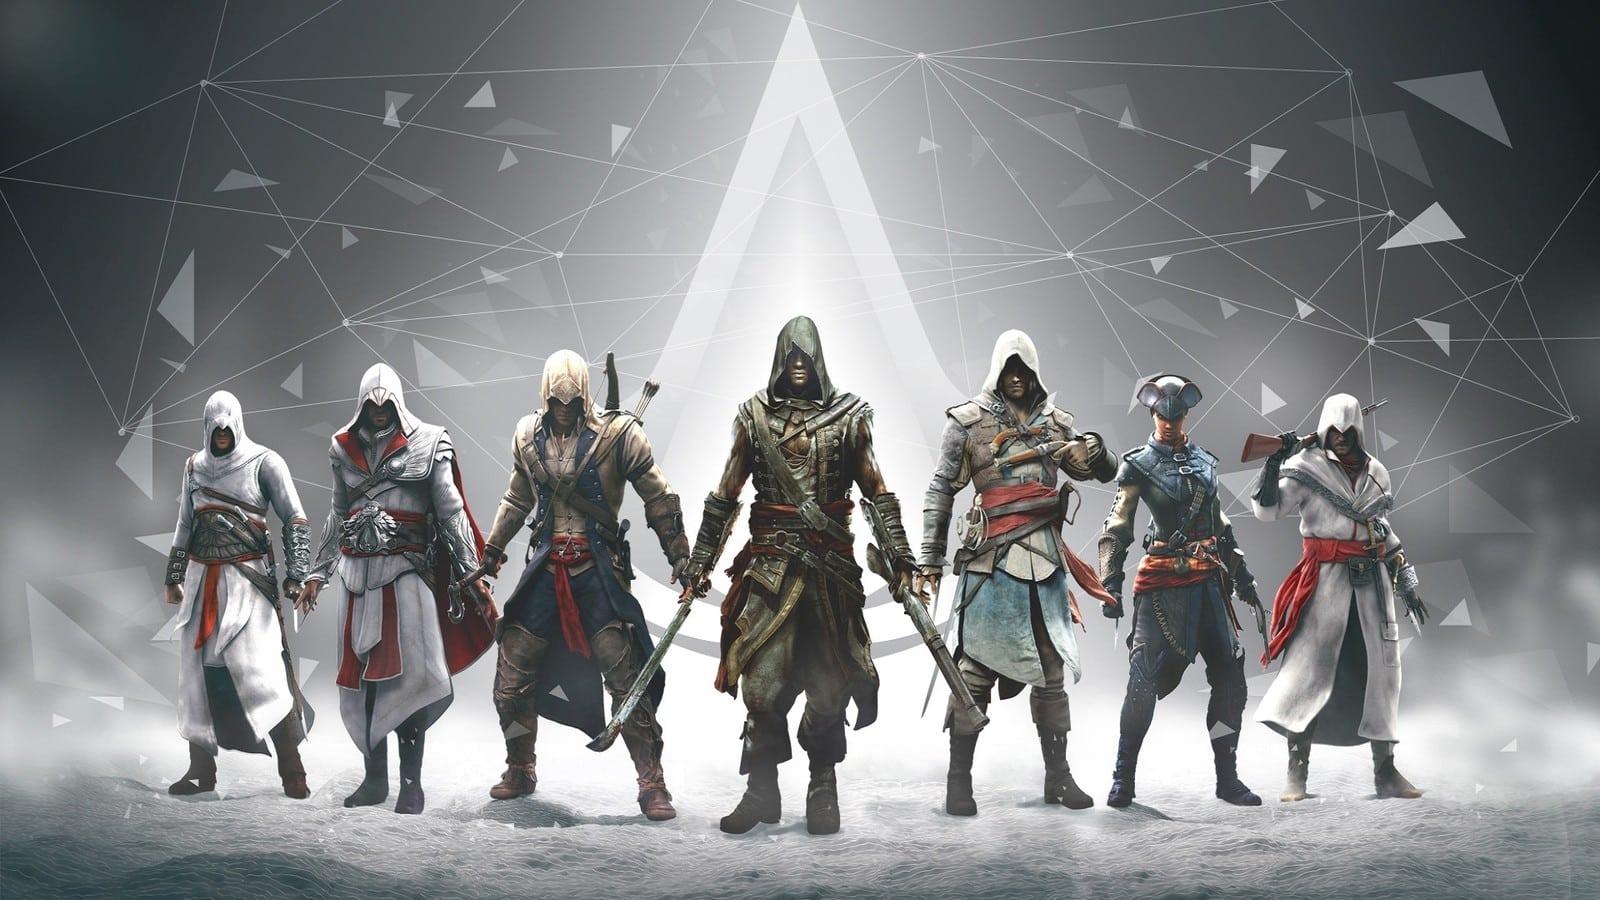 Assassin's Creed Red is Already Playable and First Details Coming